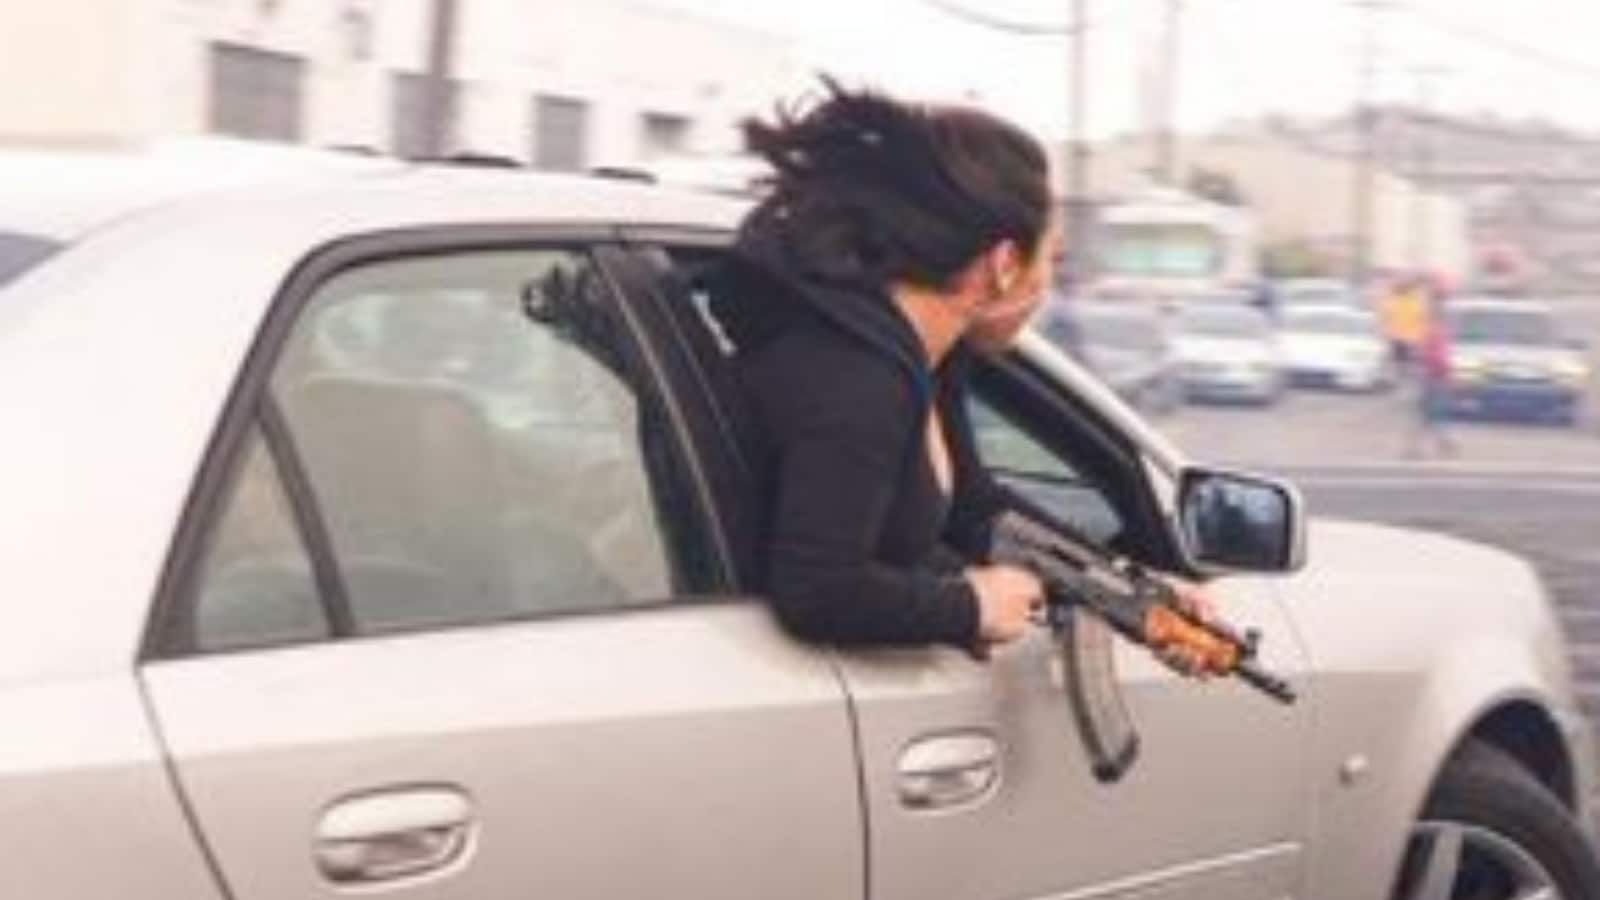 US Woman Leans Out of Moving Car Holding AK-47 in Viral Photo, Cops Seize Vehicle